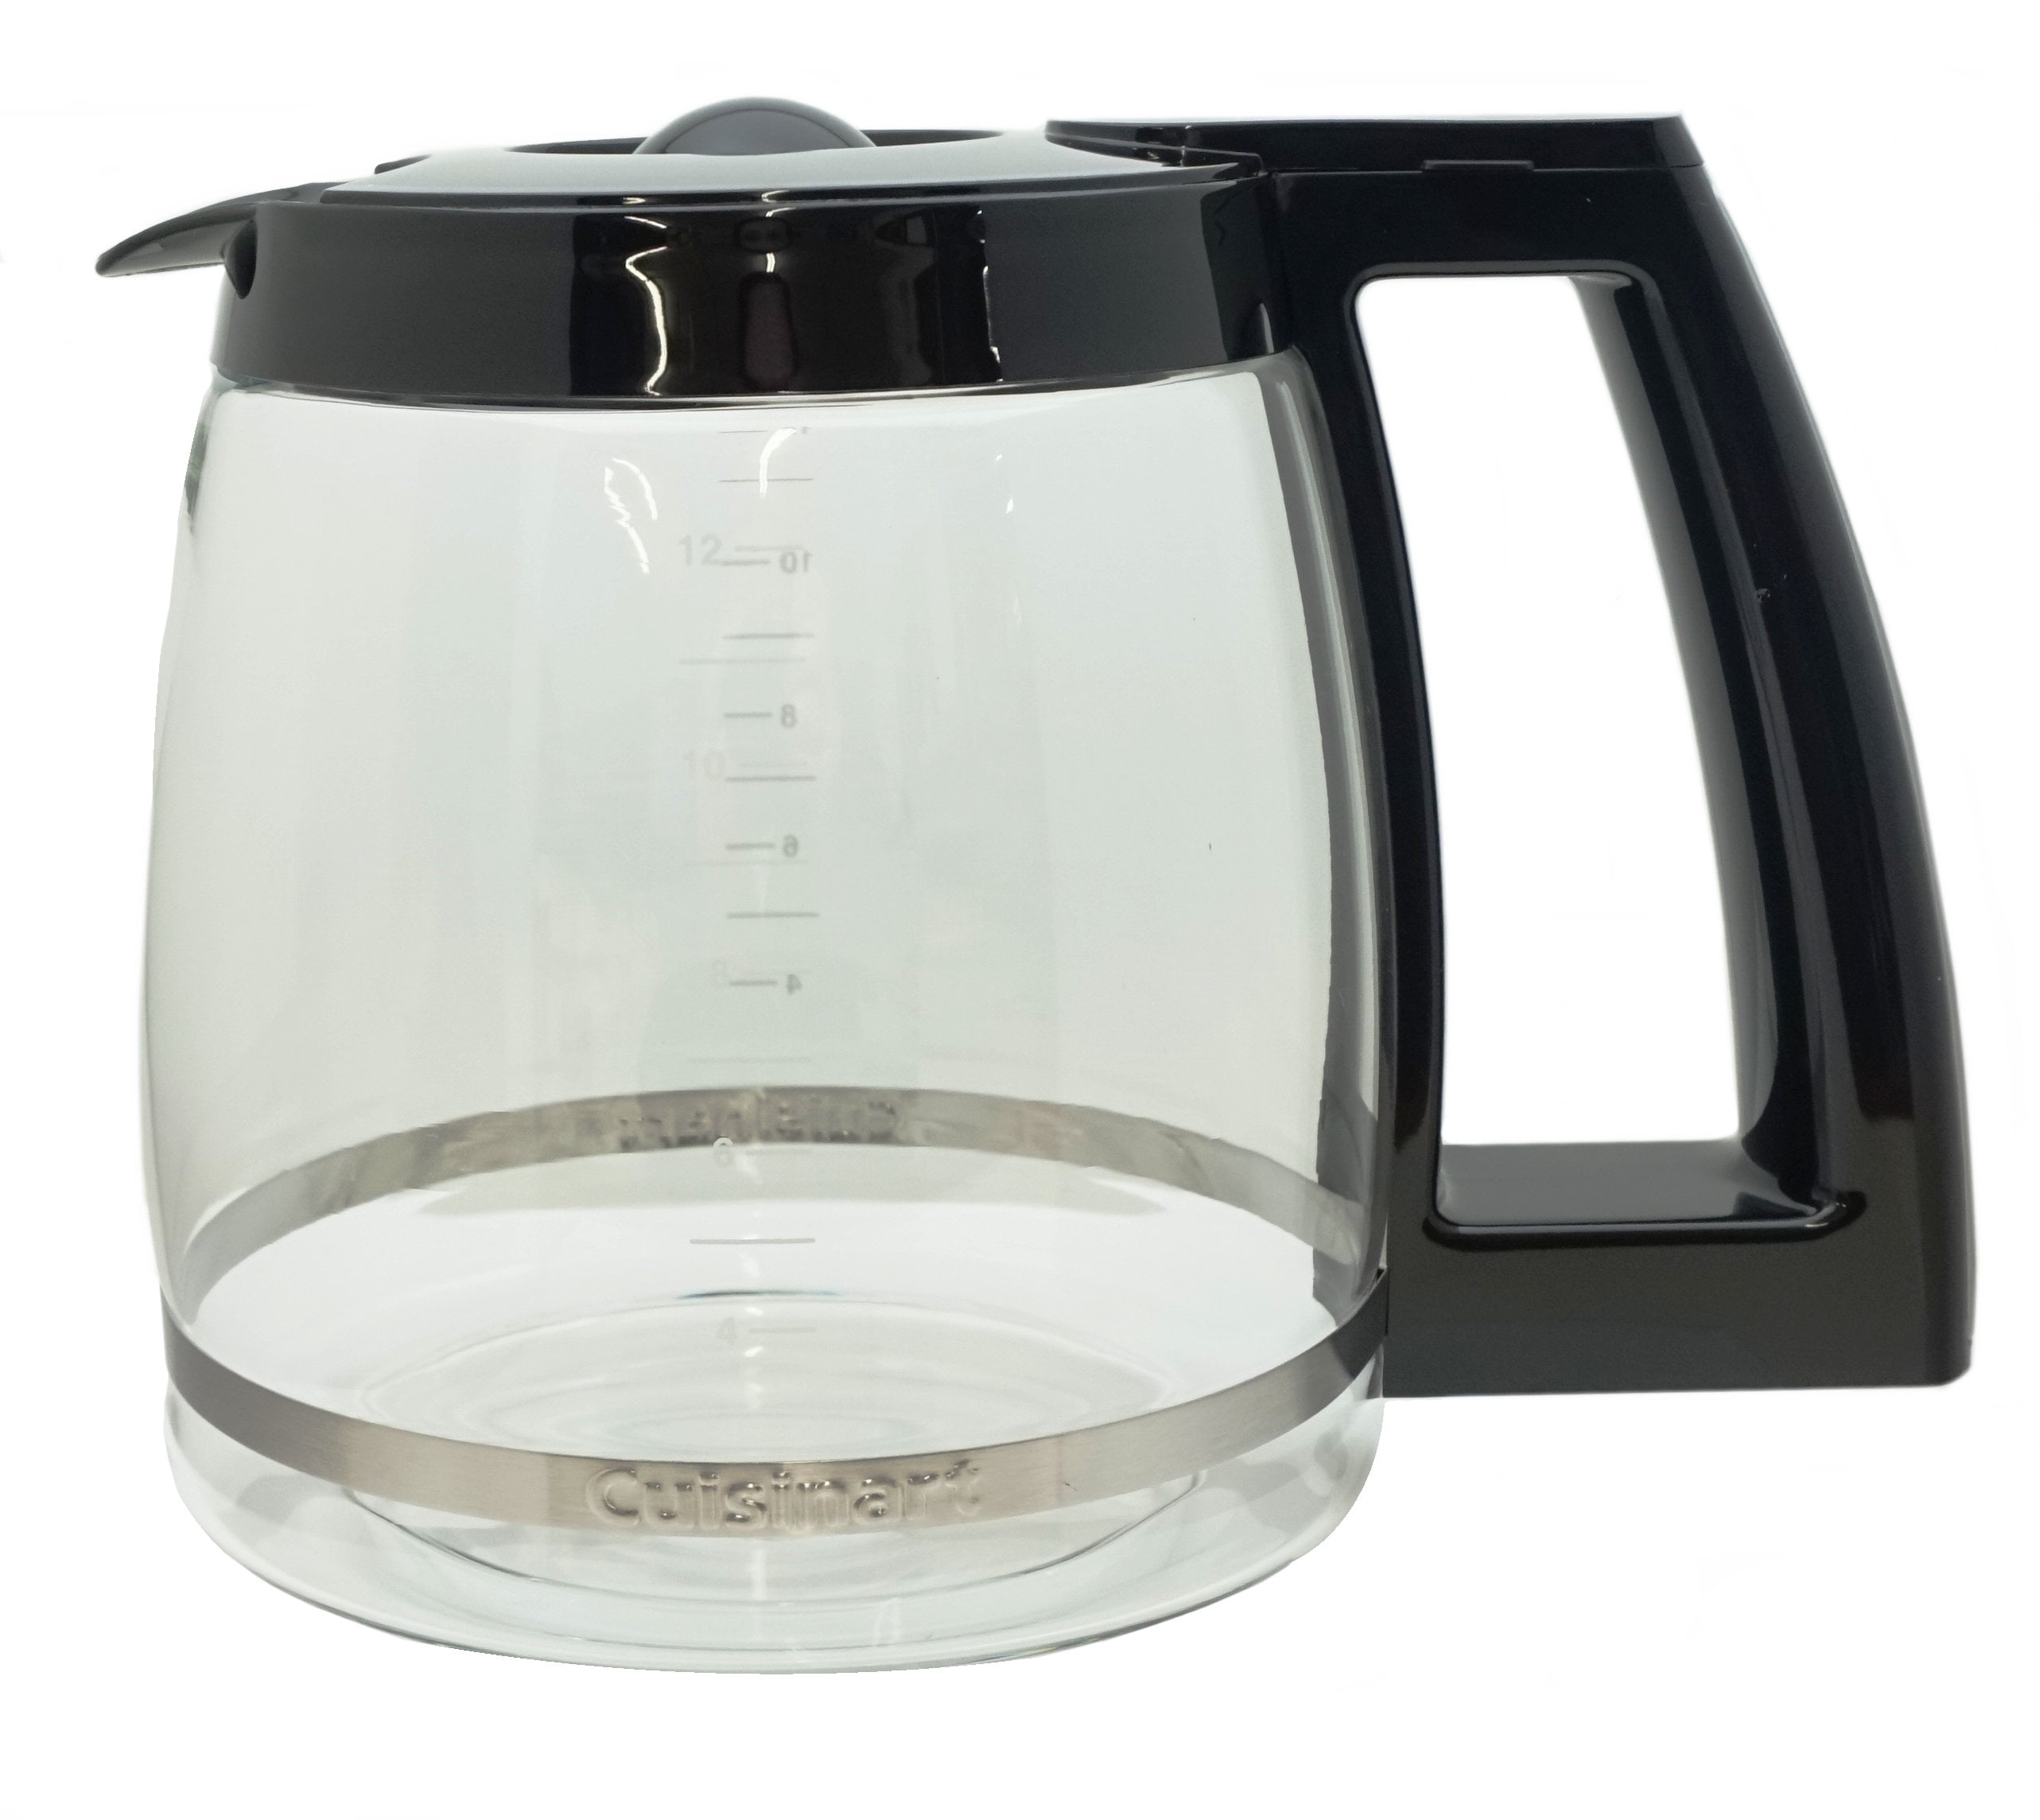  Café Brew Collection Universal 12-Cup Coffee Replacement Carafe  - Fits Mr. Coffee, Cuisinart, Hamilton Beach, and More - Heat-Resistant  DURAN Glass - Safe and Convenient - Easy Cleaning: Home & Kitchen